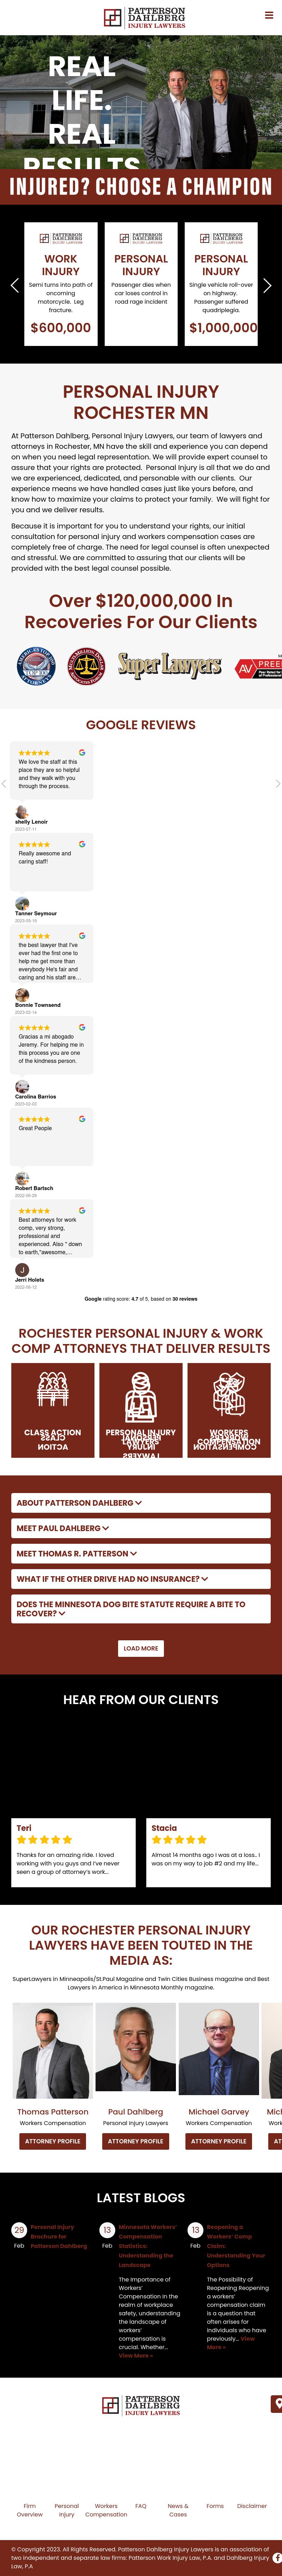 Patterson Dahlberg Injury Lawyers - Rochester MN Lawyers